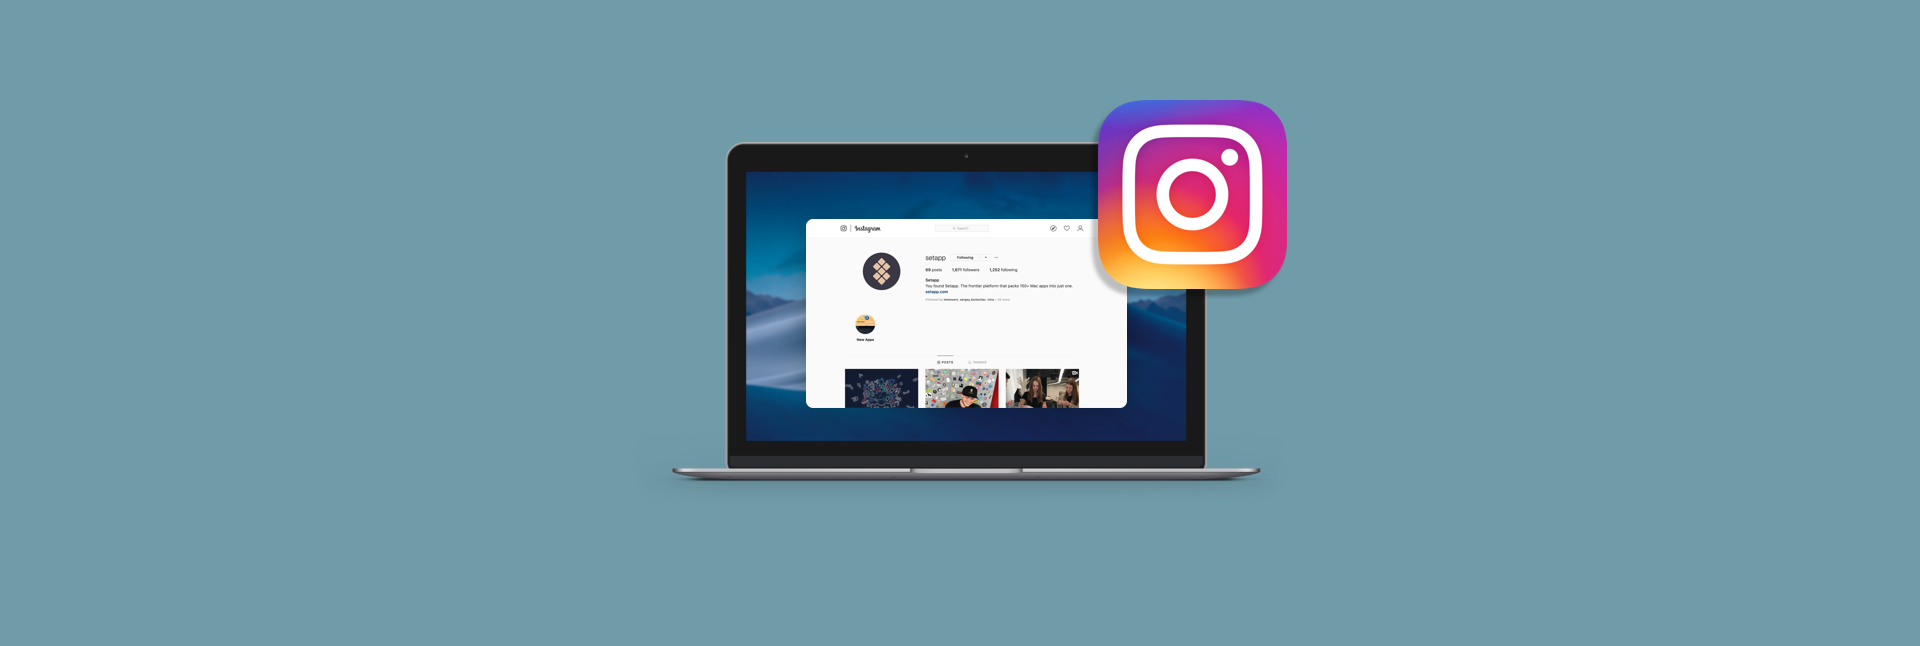 editing videos for instagram on mac